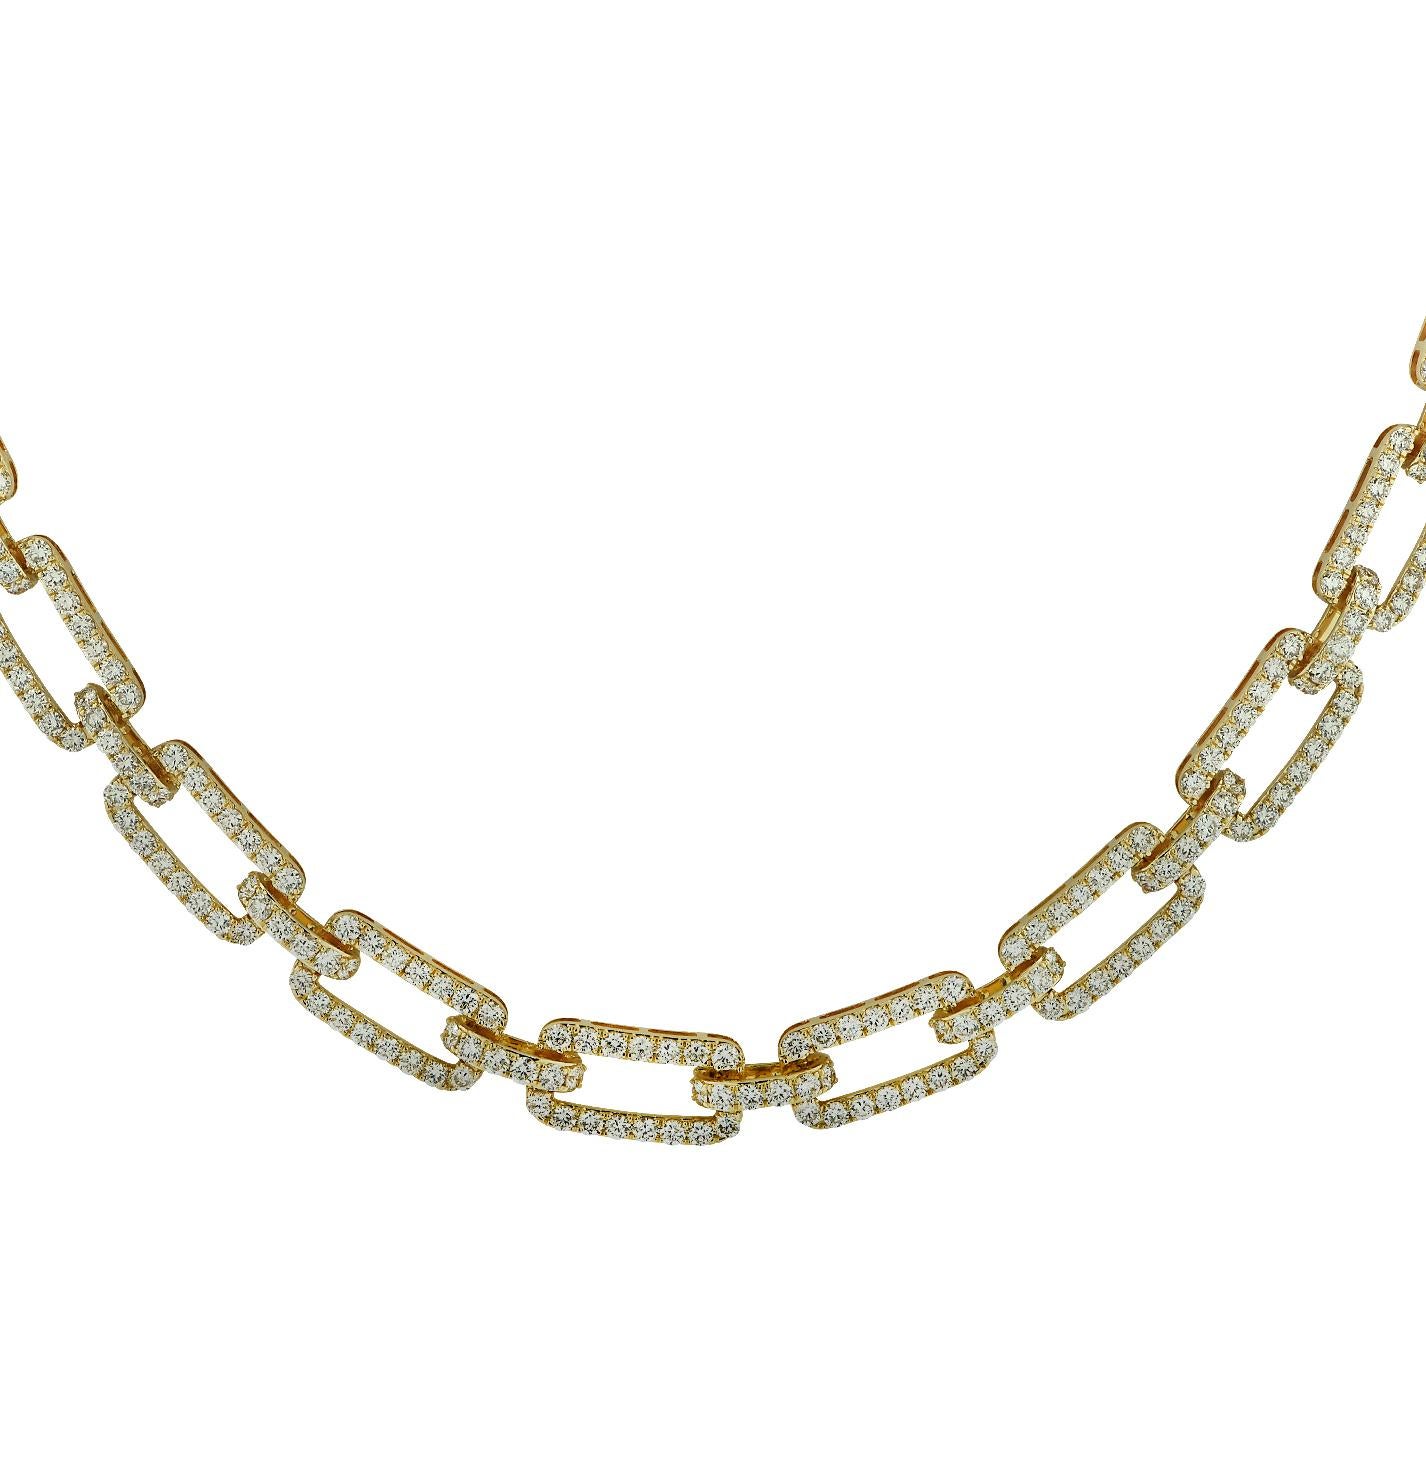 Elegant diamond link necklace, crafted in 14 karat yellow gold, embellished in 541 round brilliant cut diamonds, weighing approximately 12.52 carats total, H-I color, SI clarity. The necklace measures 7.6 mm in width, 17 inches in length, and weighs